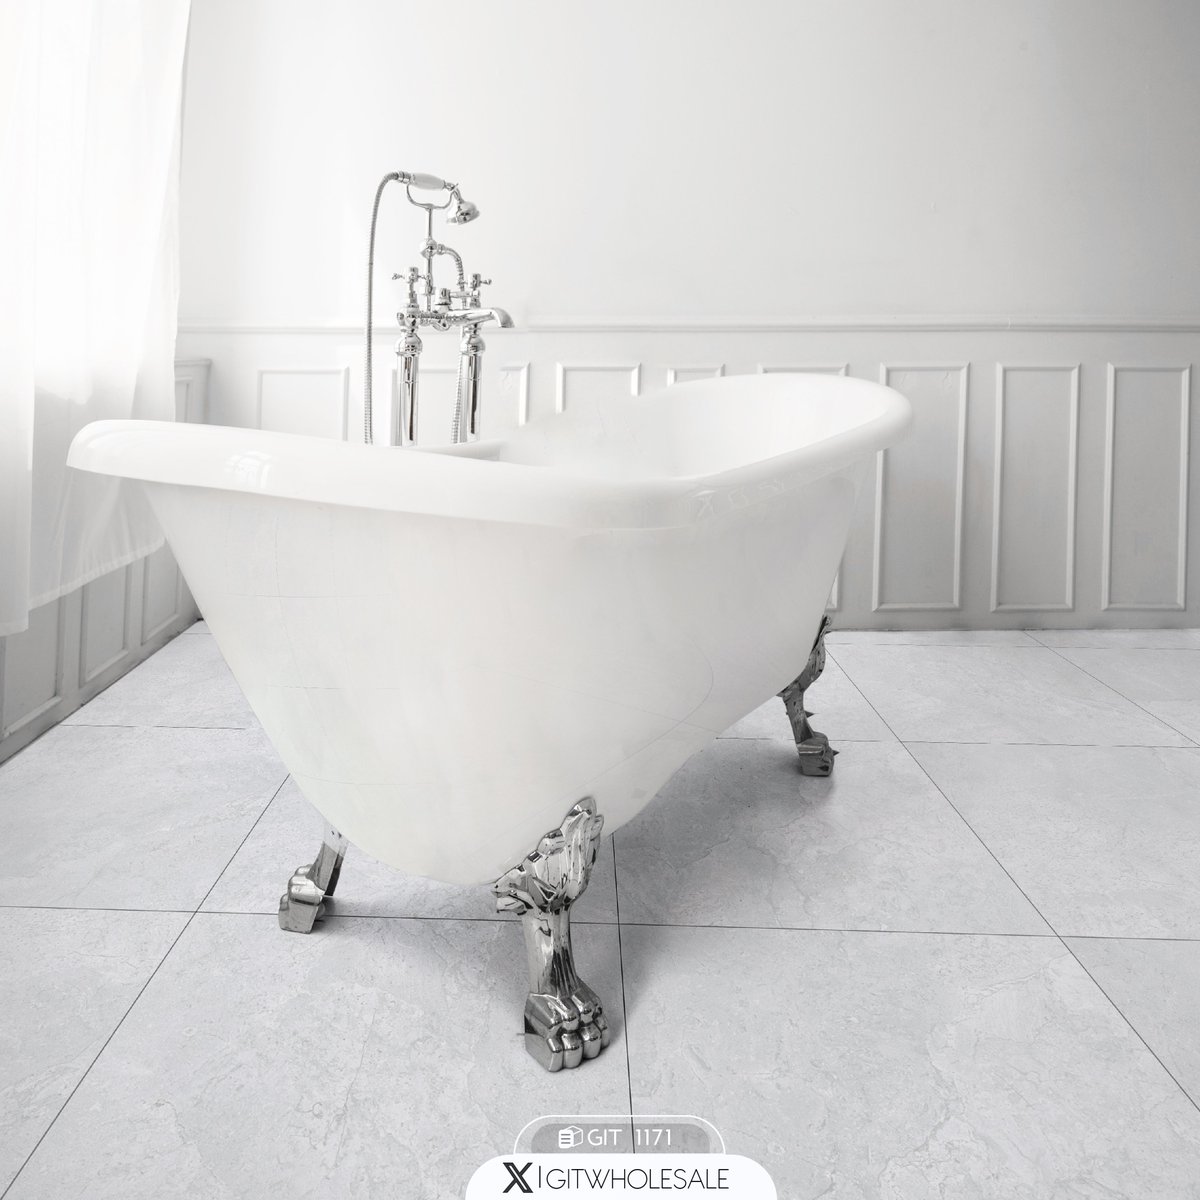 Exciting news! GIT Wholesale carries all kinds of porcelain tiles, from small to large, in a variety of finishes. Message us to find out more!

Stunning Style Without Compromise!
#GITwholesale #PorcelainTiles #TileWholesale #TileFinishes #TileSelection #HomeImprovement